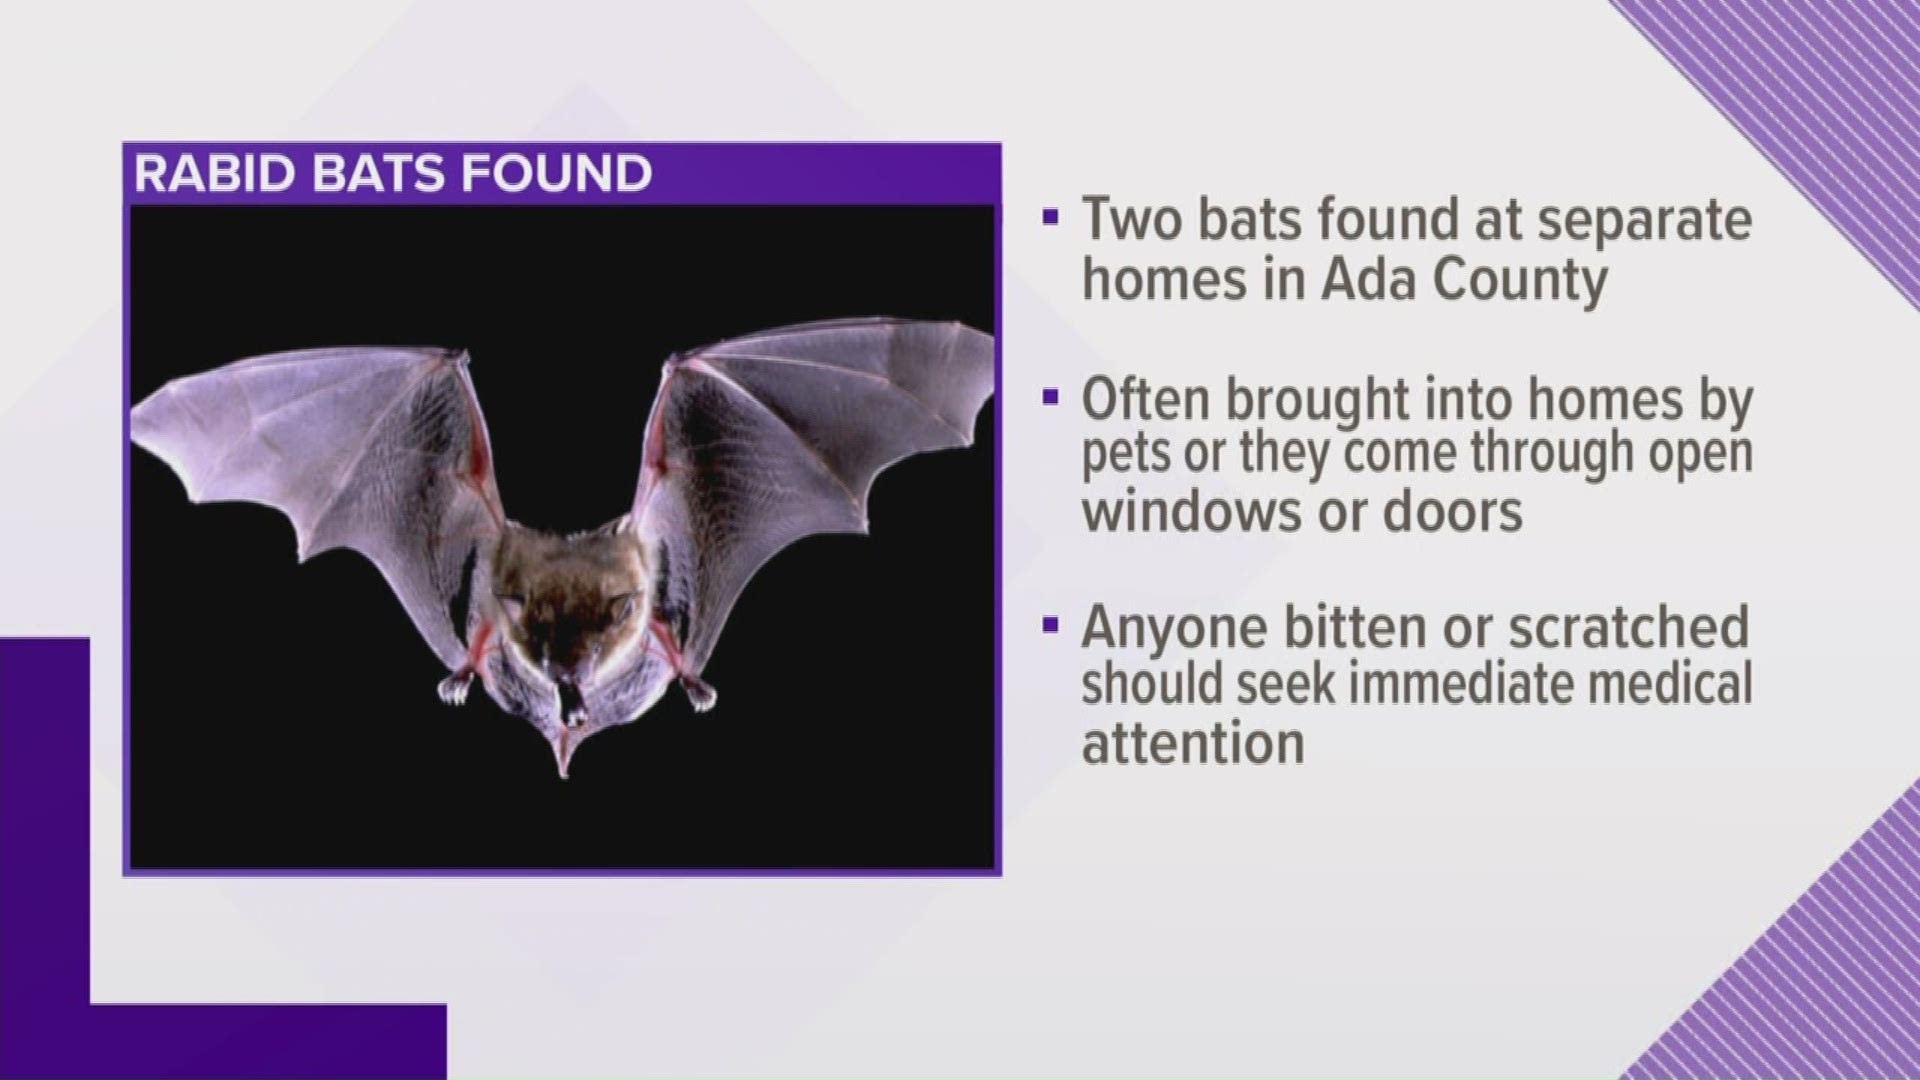 Health officials say the bats were found in two separate homes in Ada County.